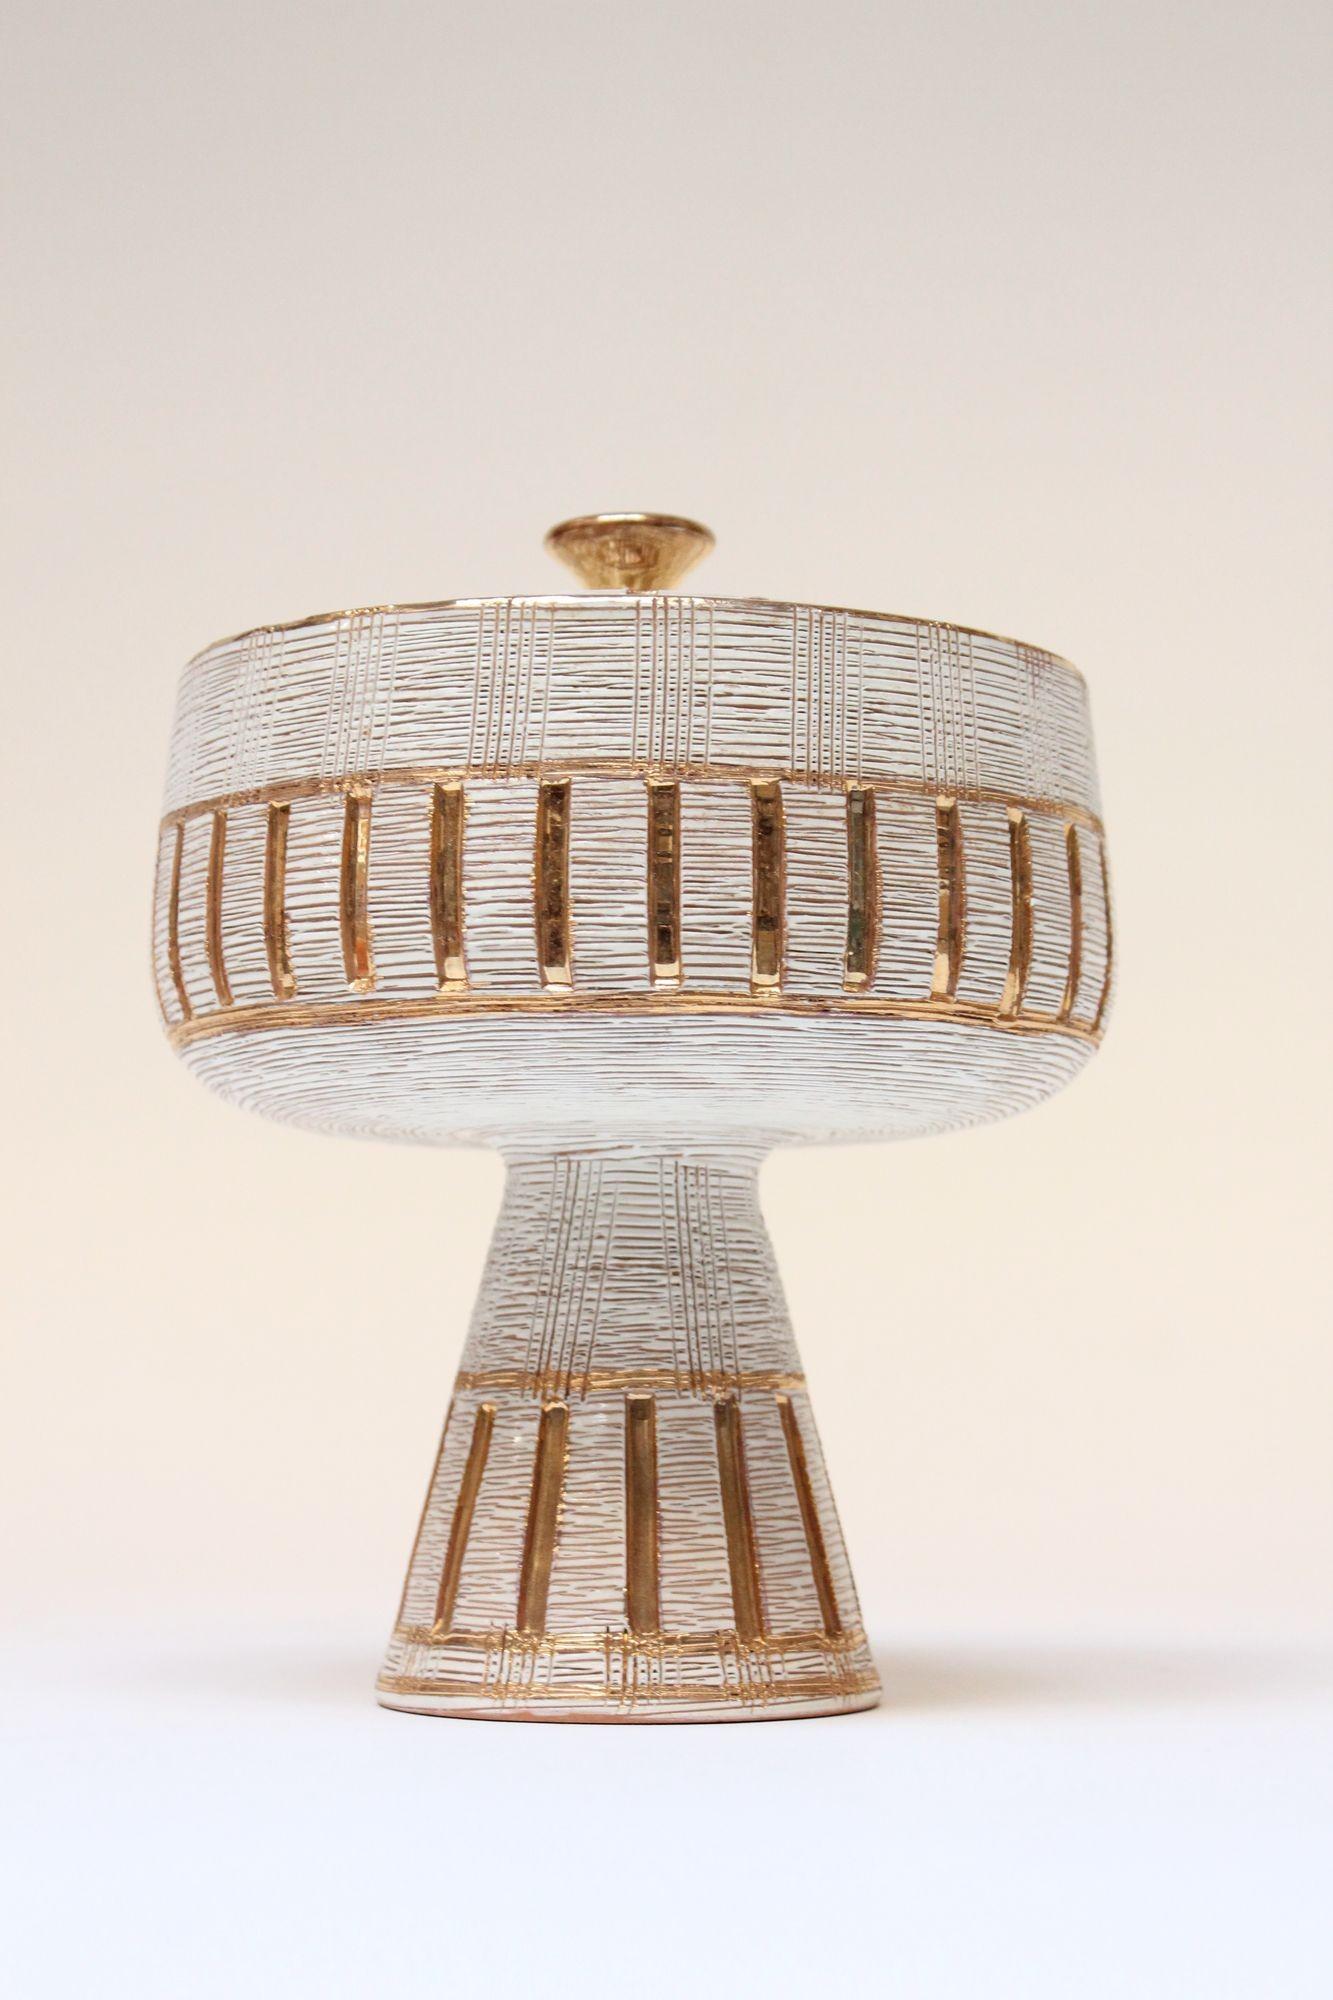 Mid-Century Modern Italian Gold and White Glazed Incised Ceramic Compote by Aldo Londi for Bitossi